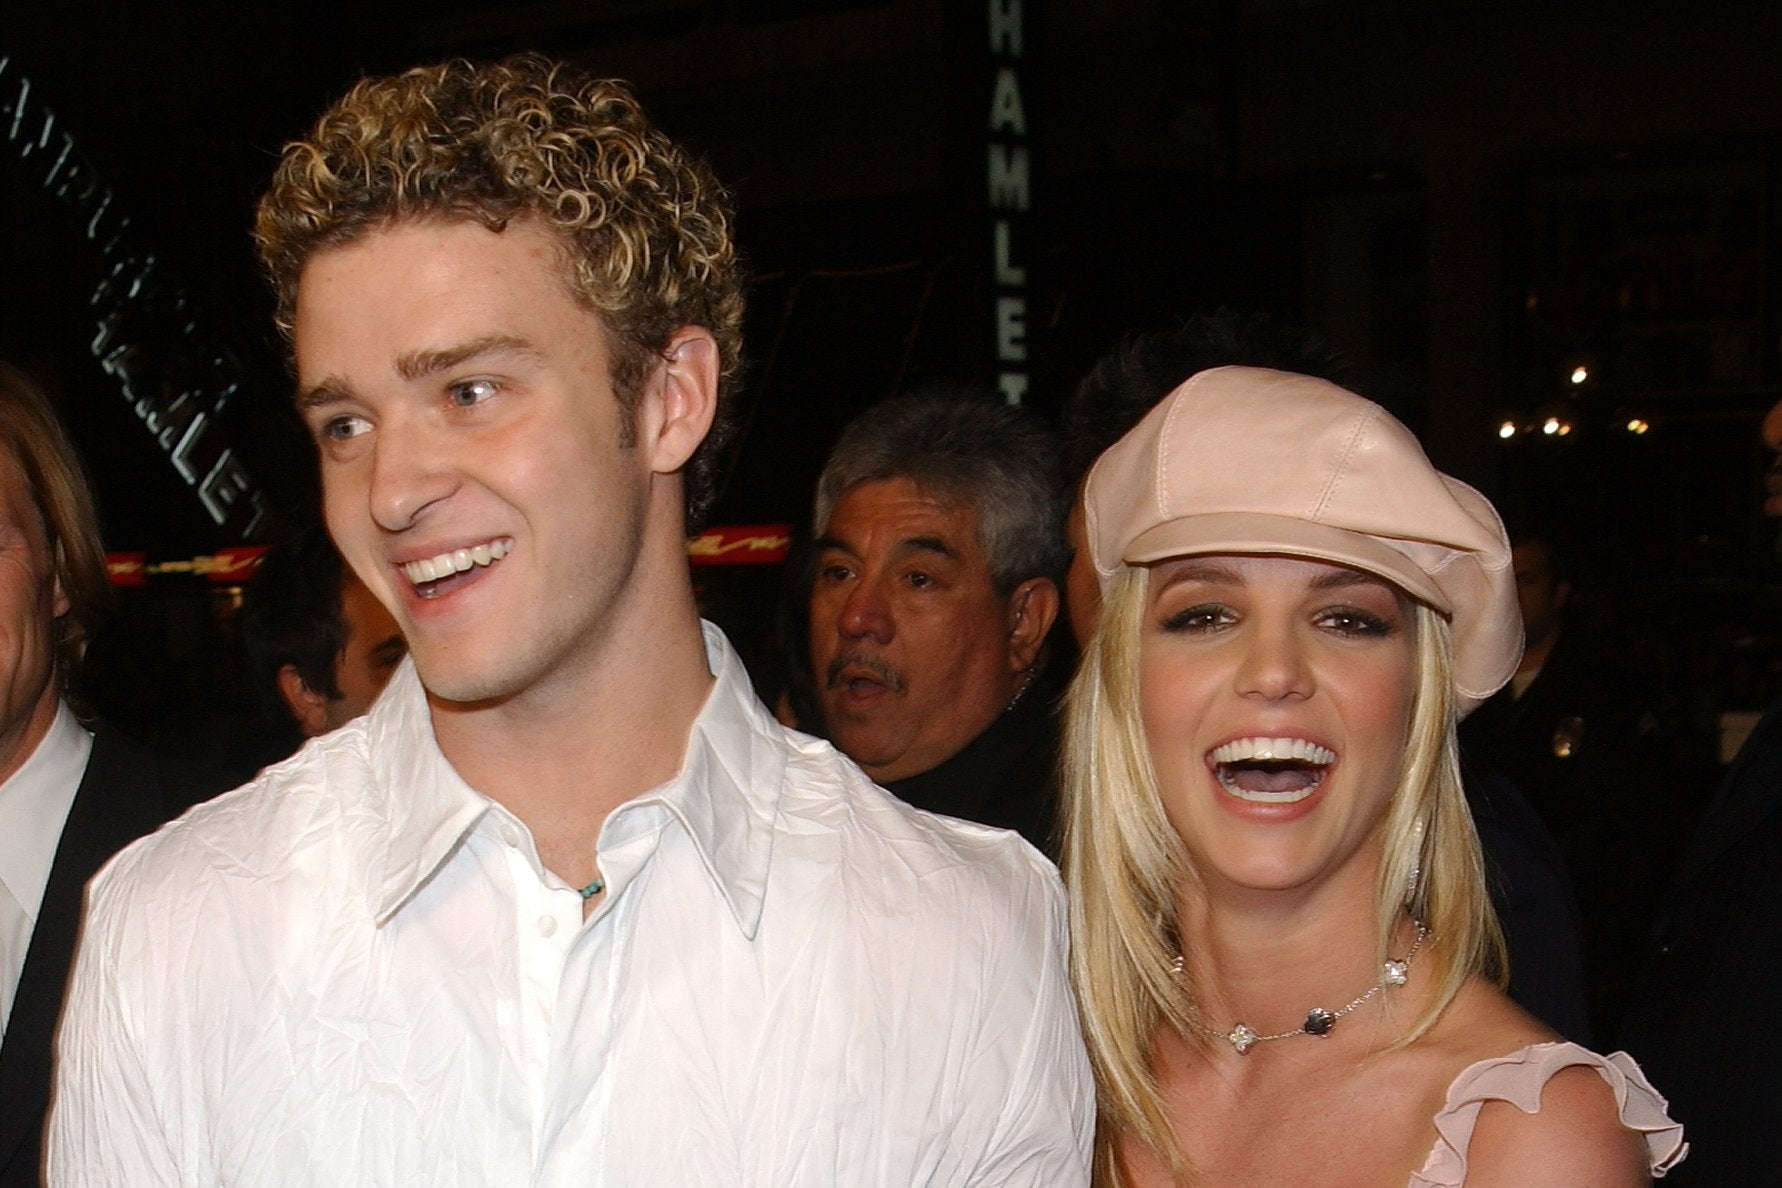 Why Did Britney Spears And Justin Timberlake Break Up In 2002?